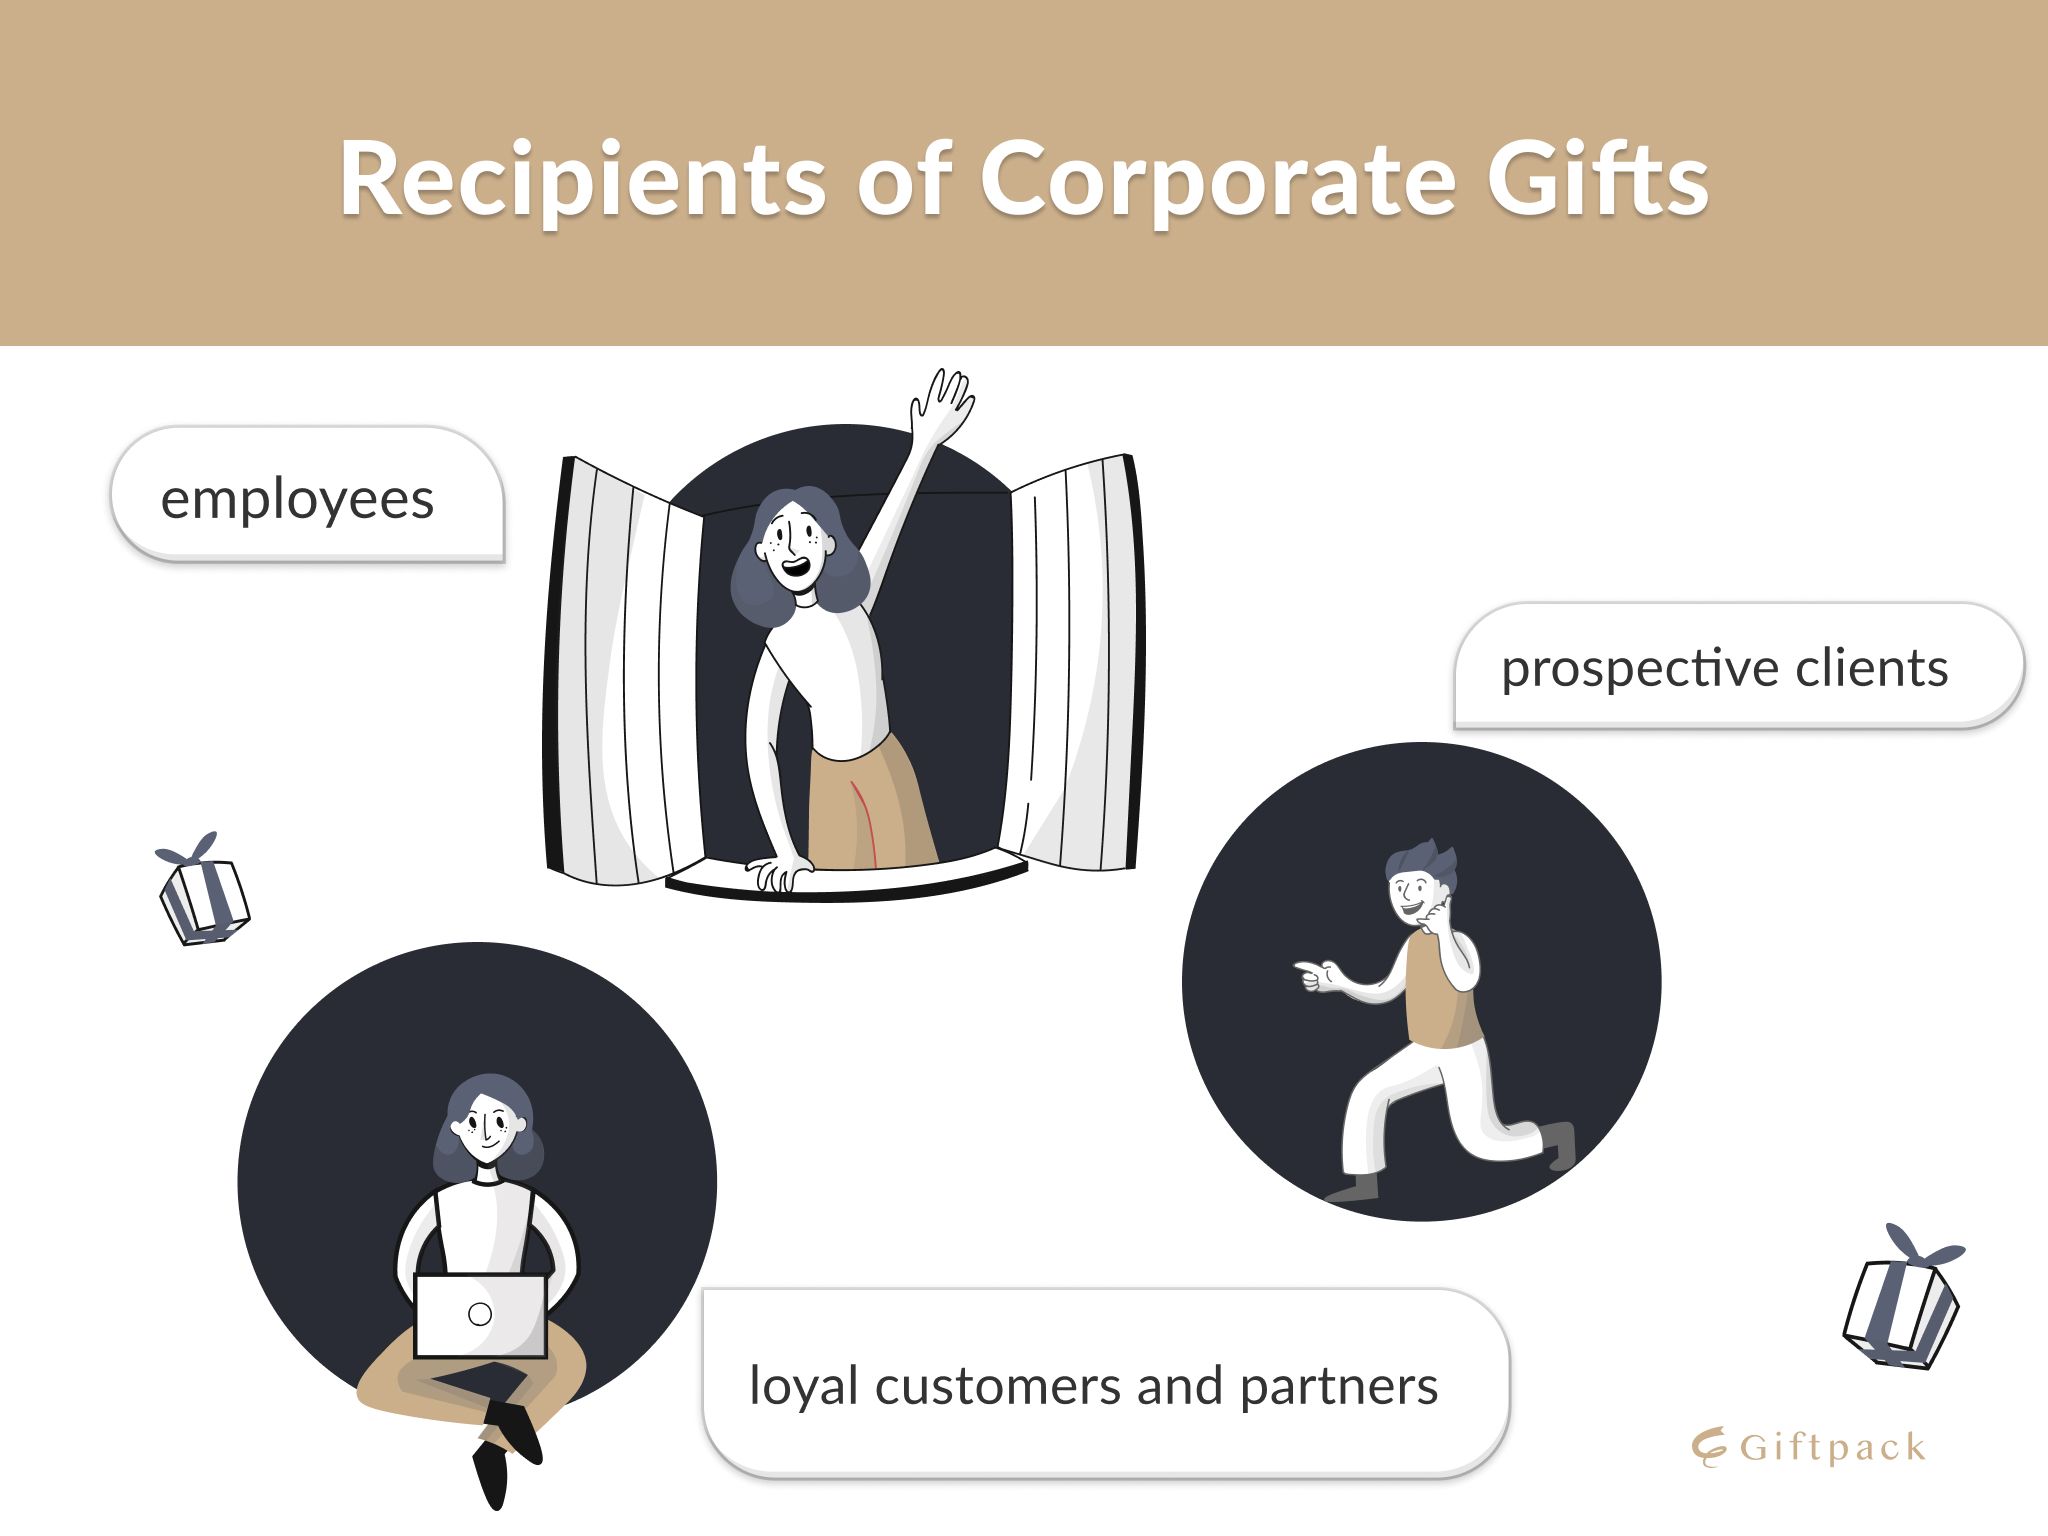 3 recipient groups of corporate gifts illustration